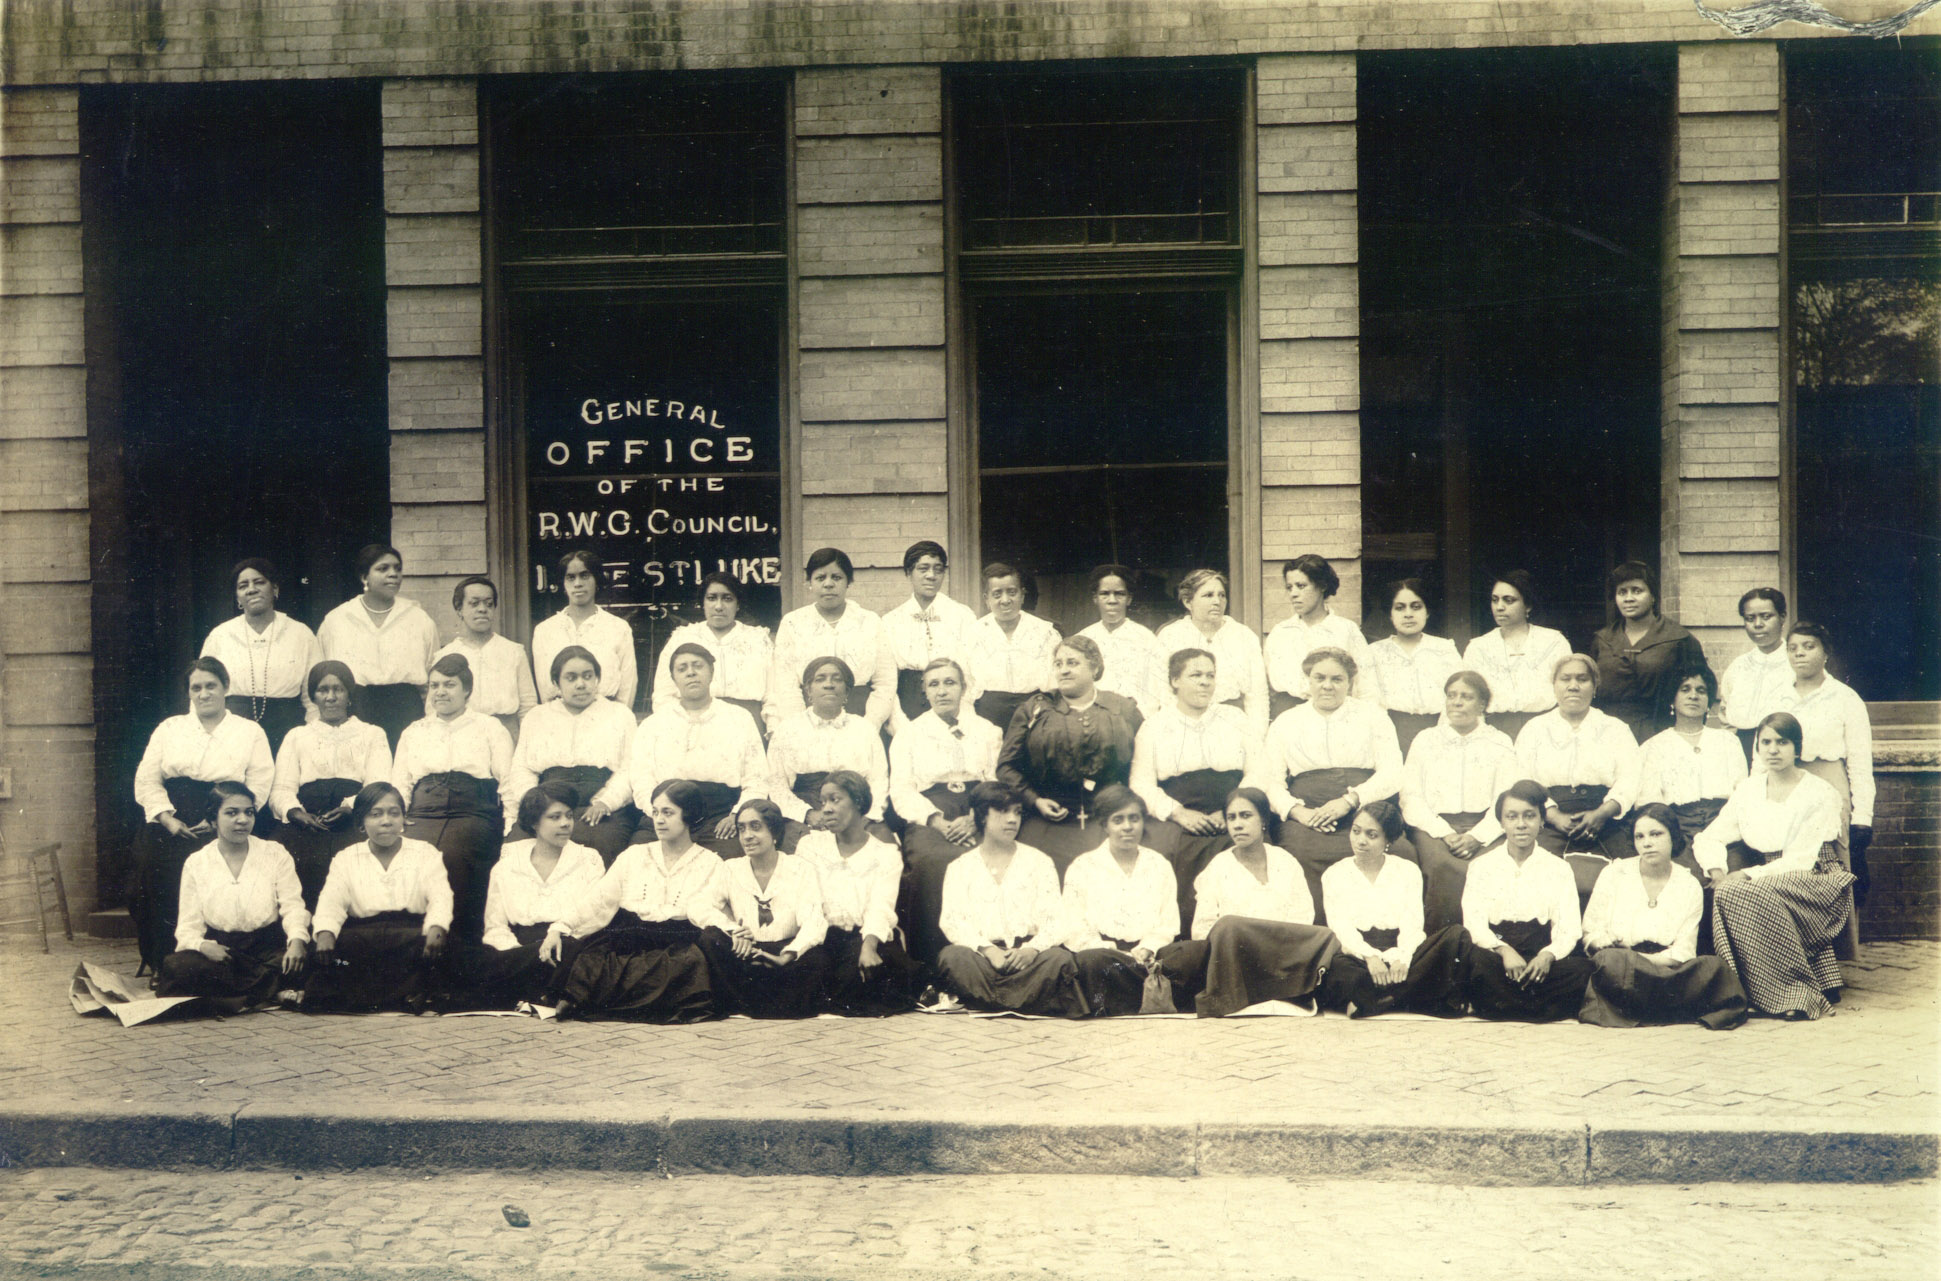 A historic black and white photo of a group of about 50 African American women posing in front of a brick building with large windows.